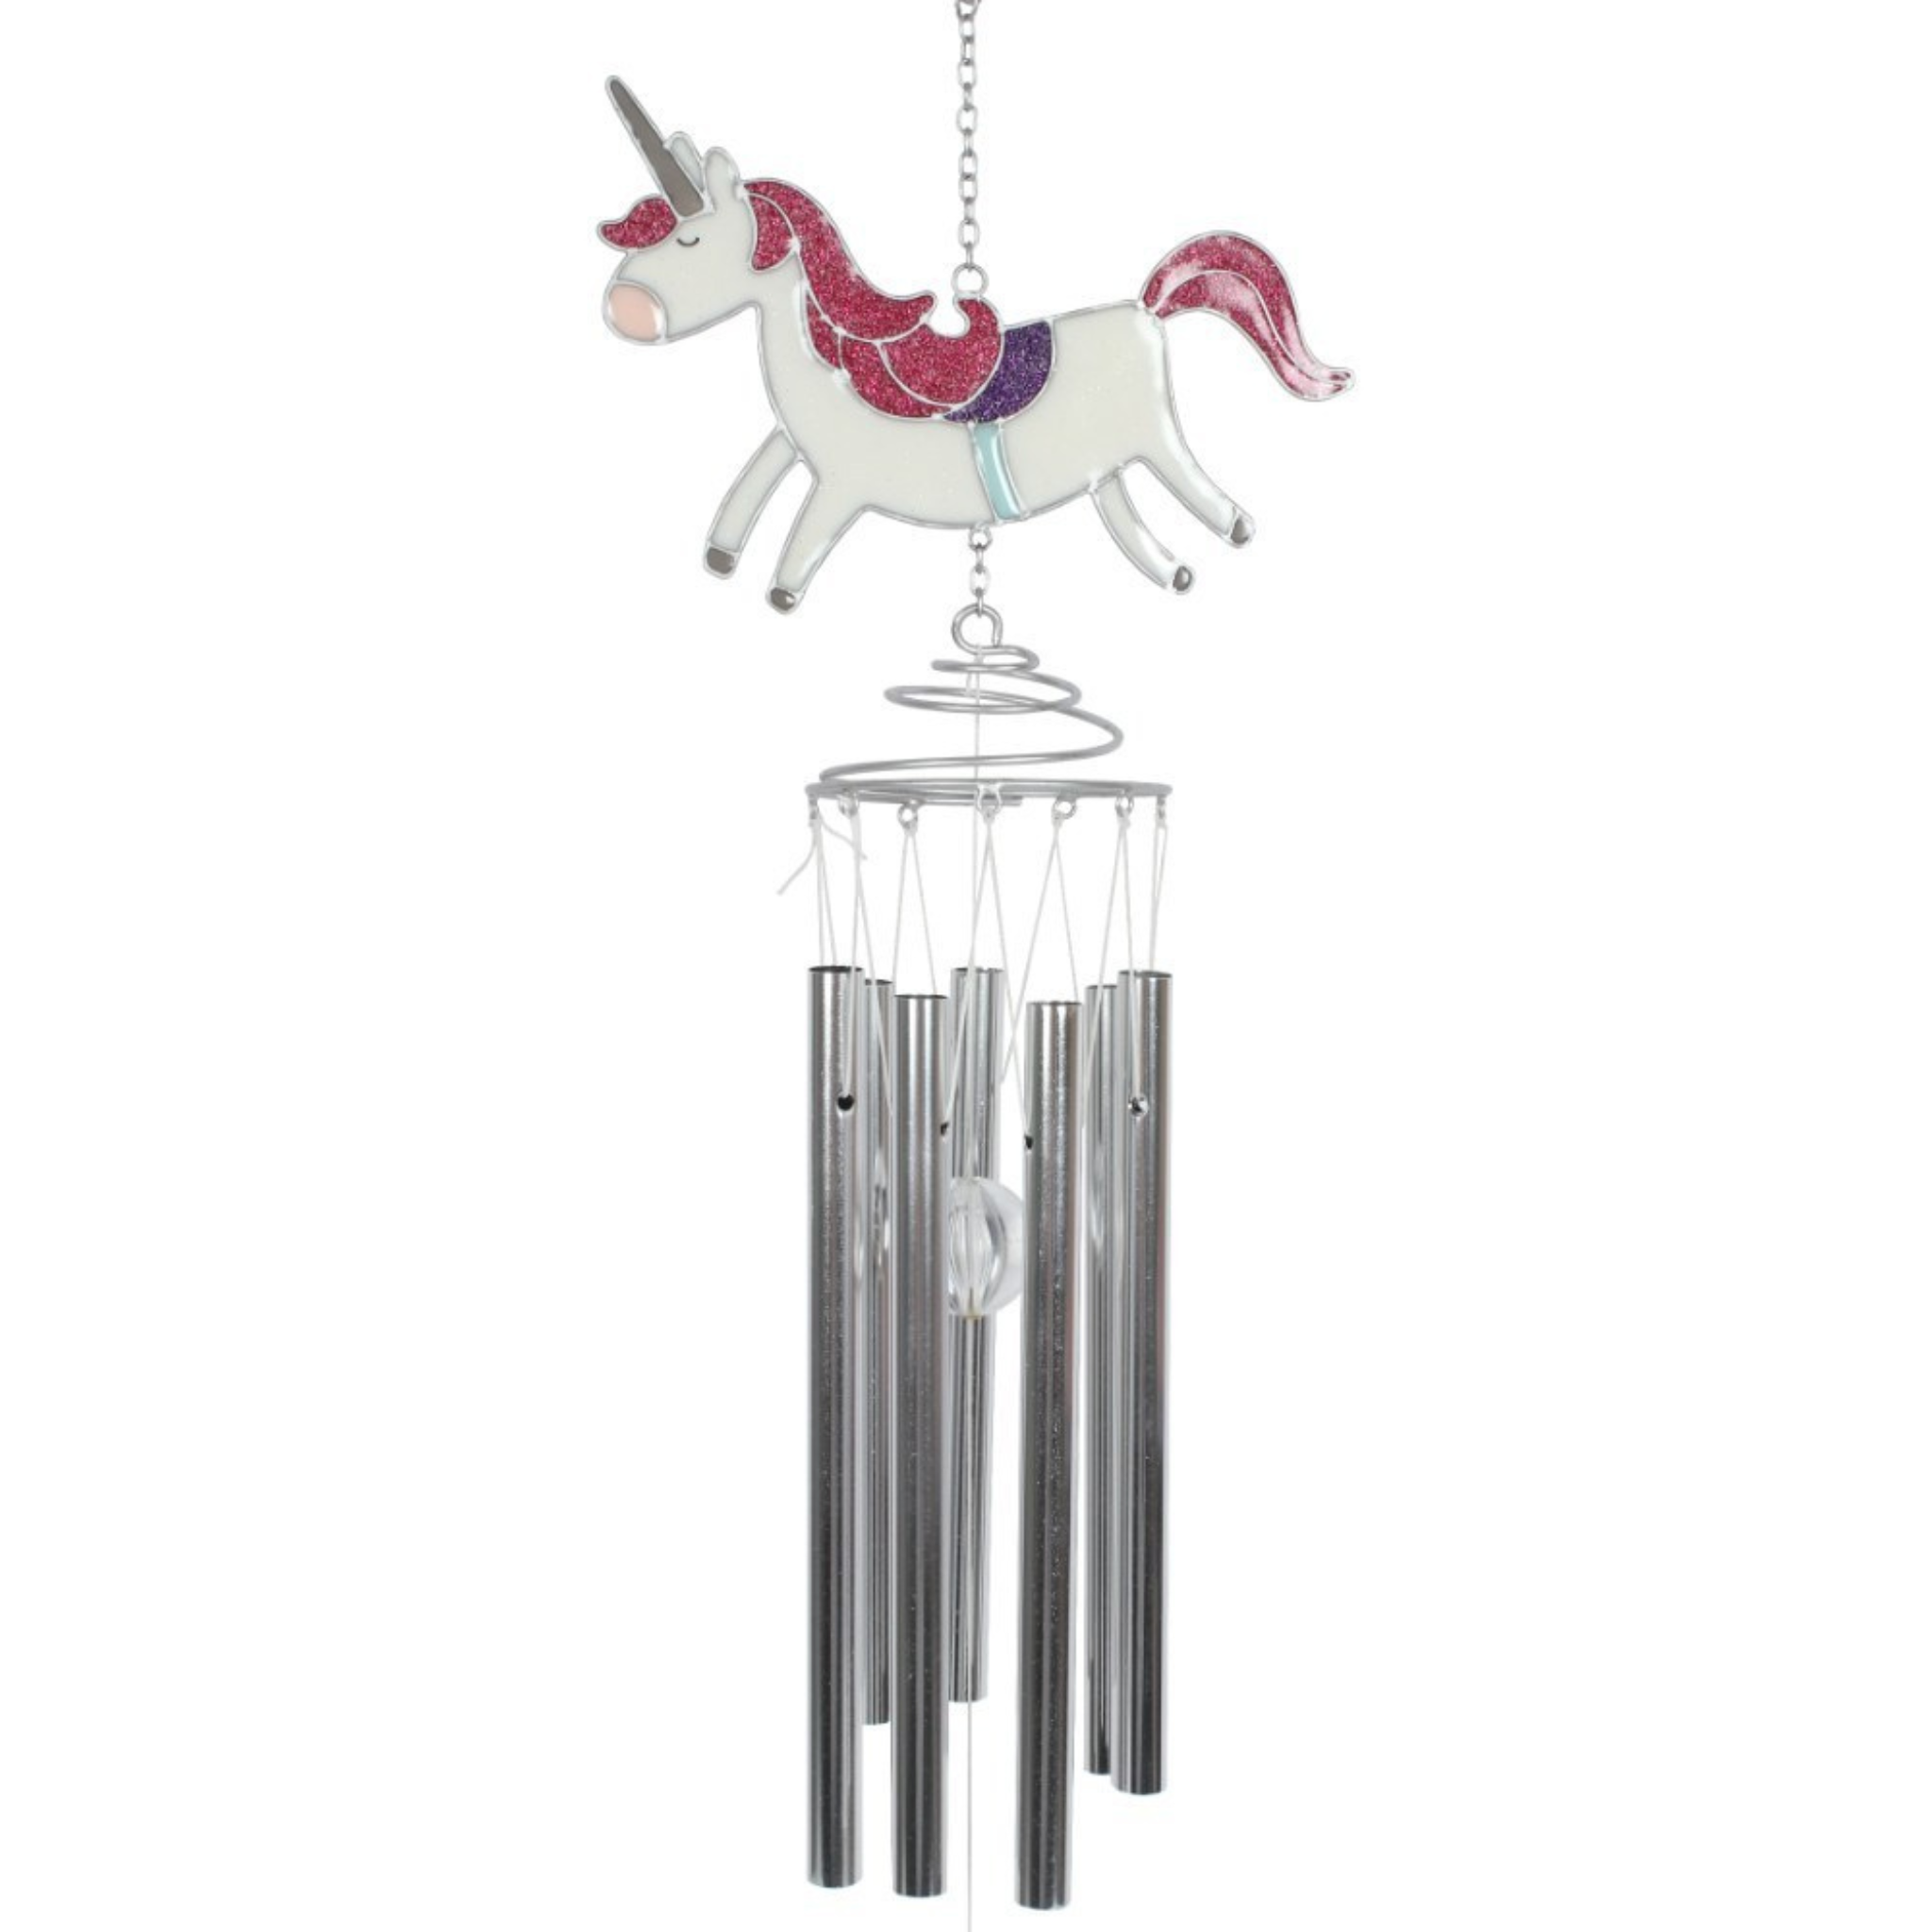 Something Different - Unicorn Magic Wind Chime CLEARANCE